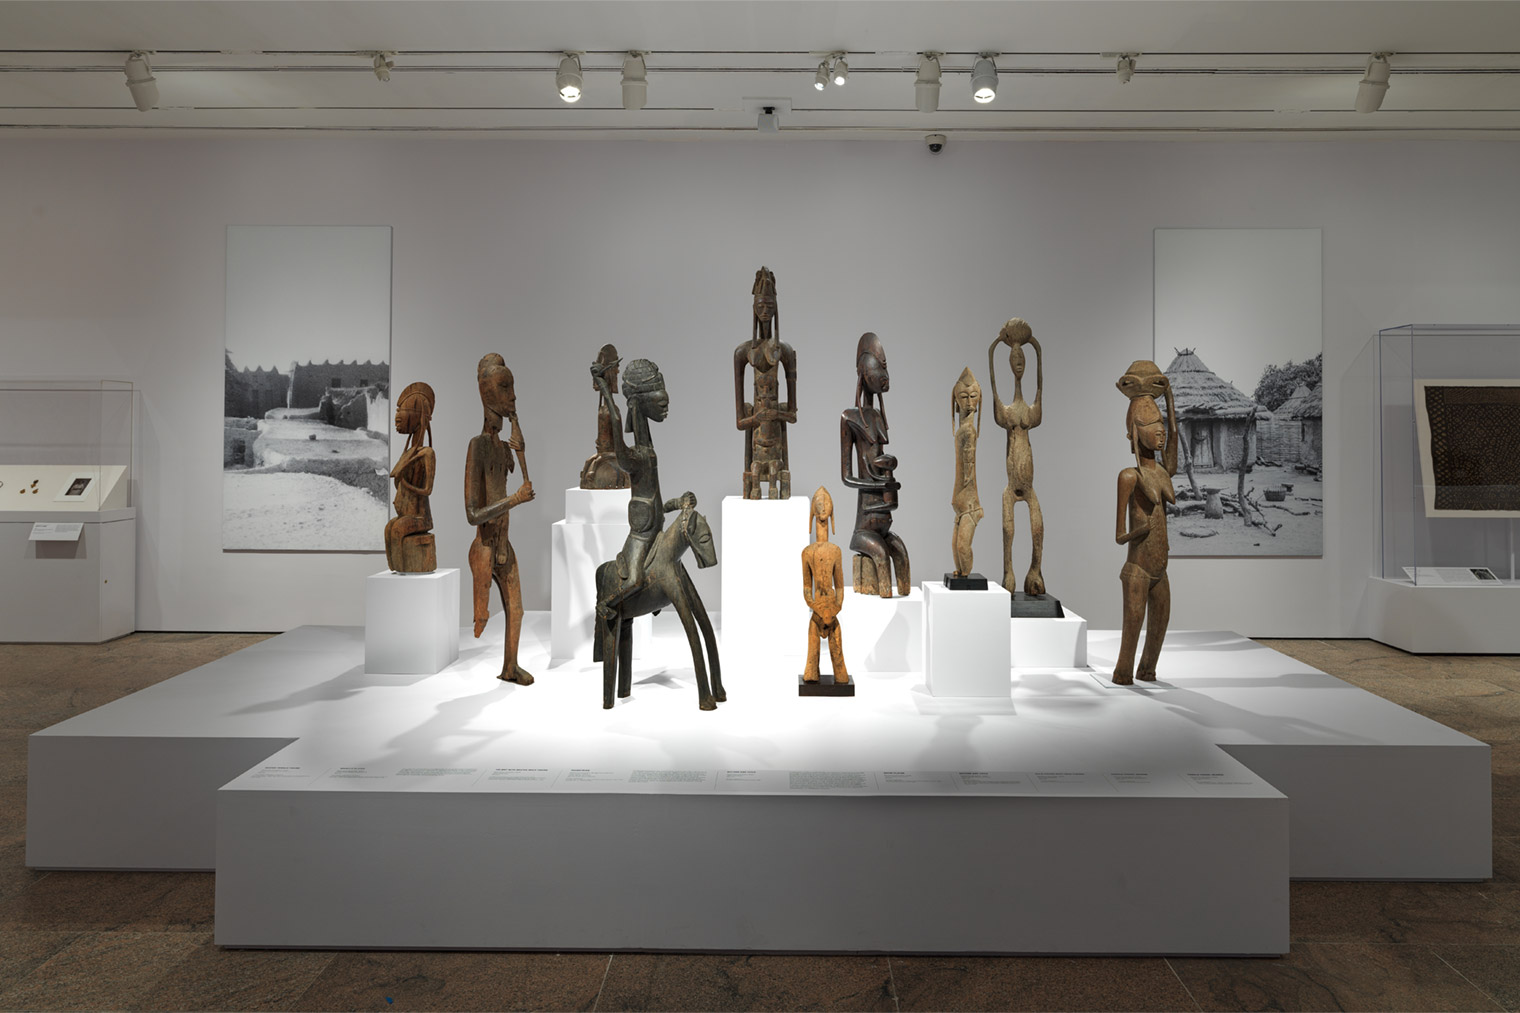 A gallery displaying a number of terracotta and wooden sculptures